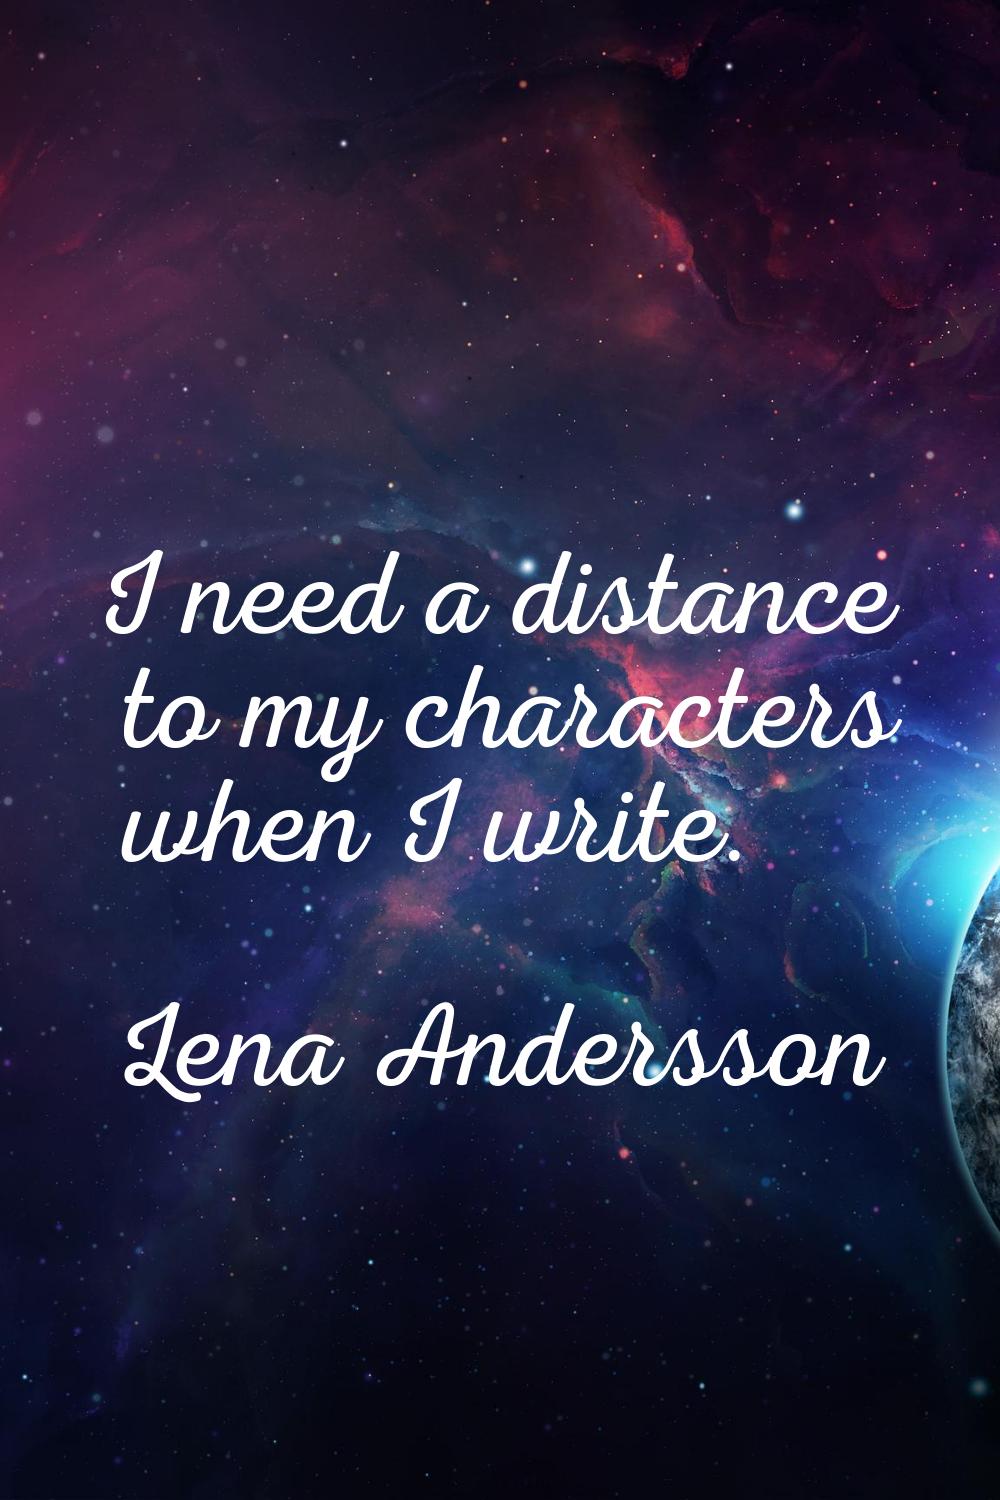 I need a distance to my characters when I write.